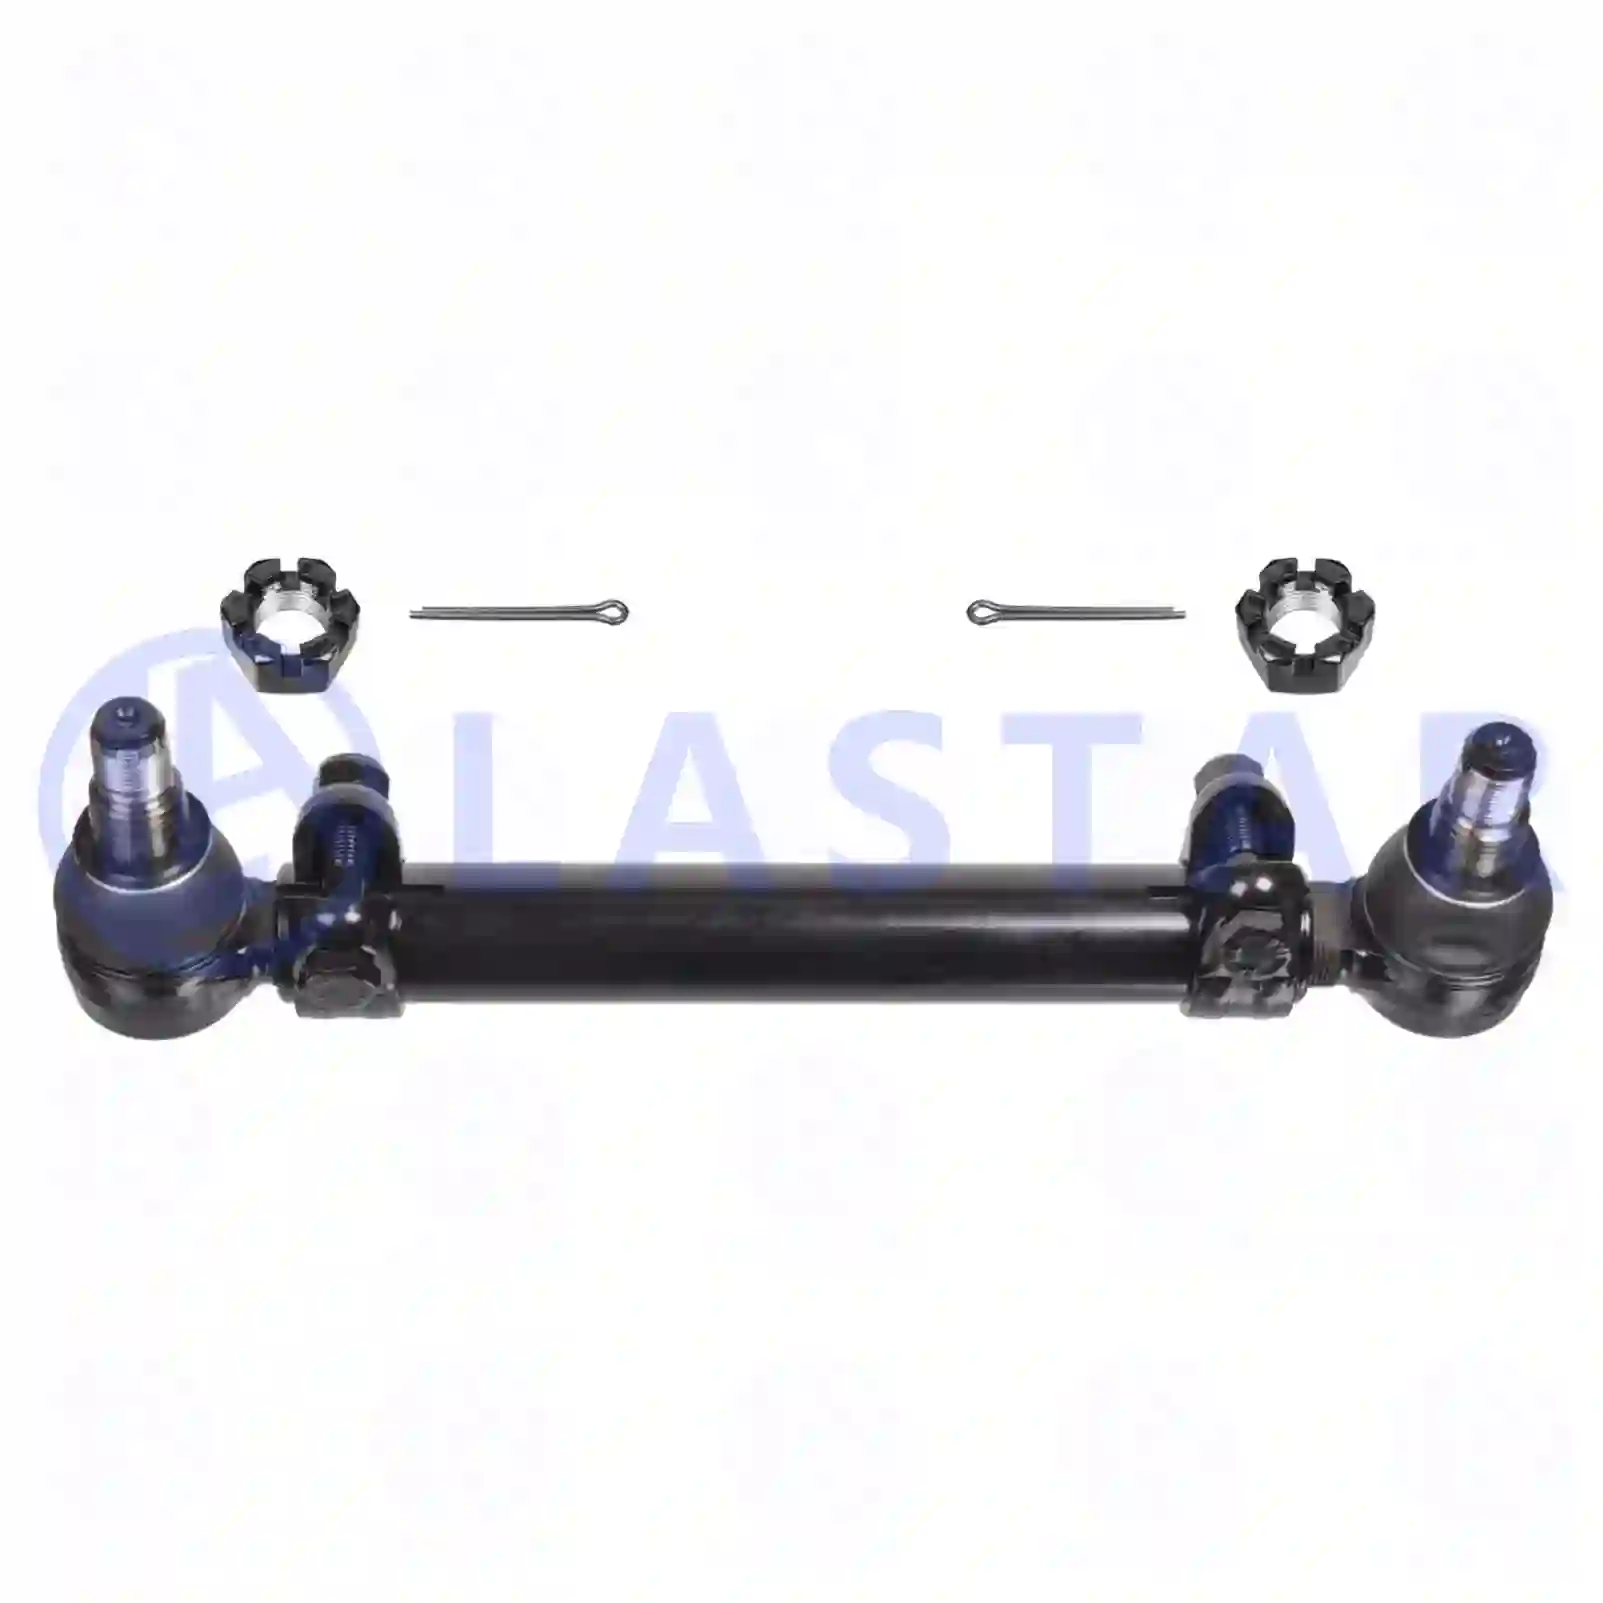 Track rod, 77731249, 1628207 ||  77731249 Lastar Spare Part | Truck Spare Parts, Auotomotive Spare Parts Track rod, 77731249, 1628207 ||  77731249 Lastar Spare Part | Truck Spare Parts, Auotomotive Spare Parts